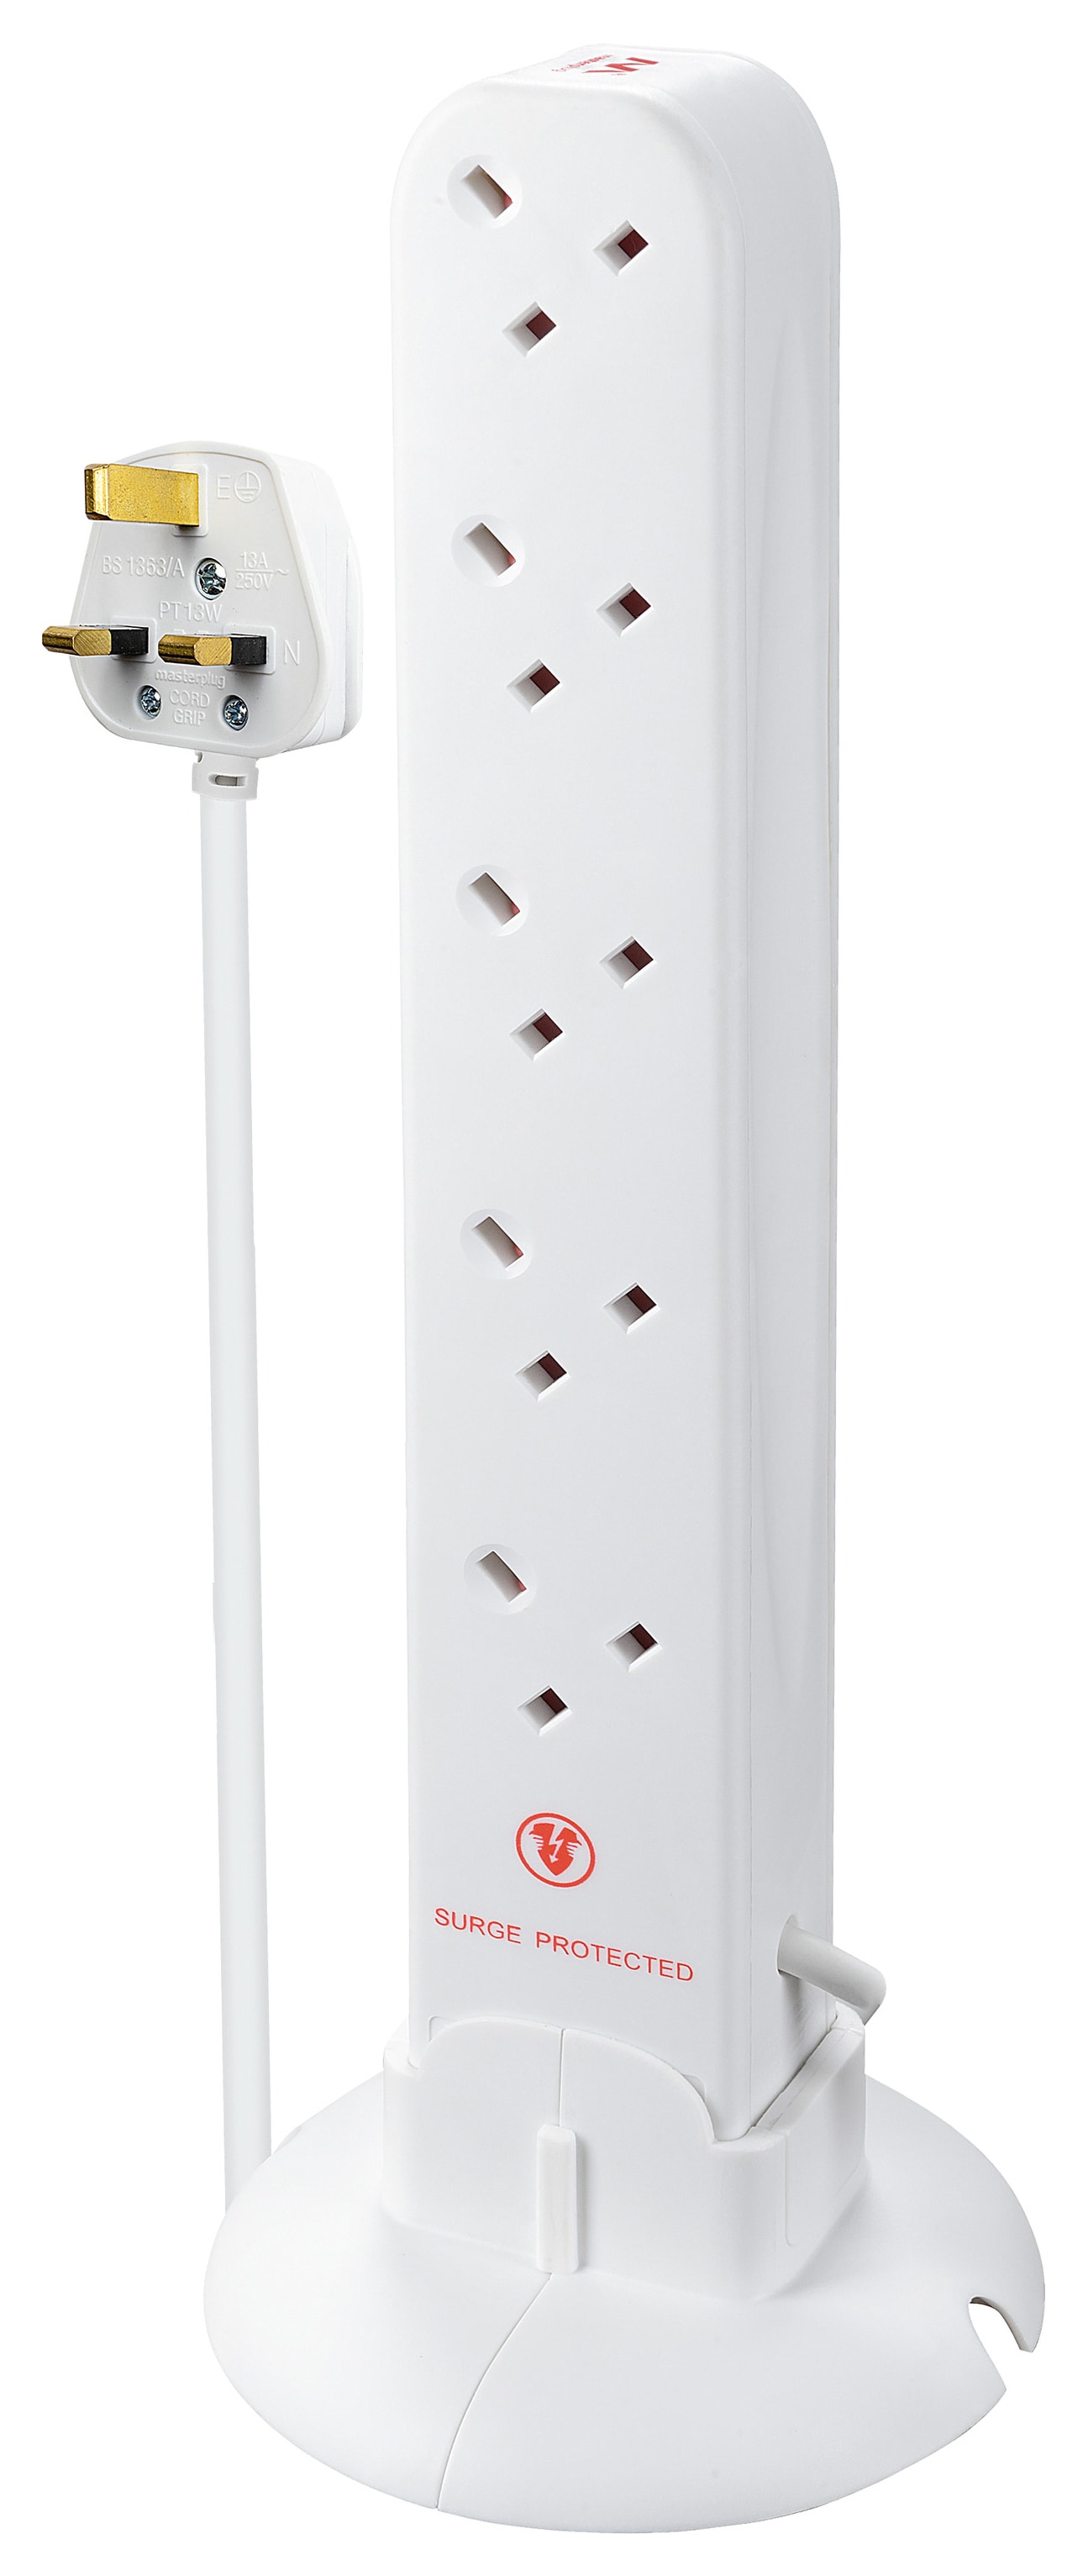 Masterplug 13A 10 Socket Surge Protected Power Tower